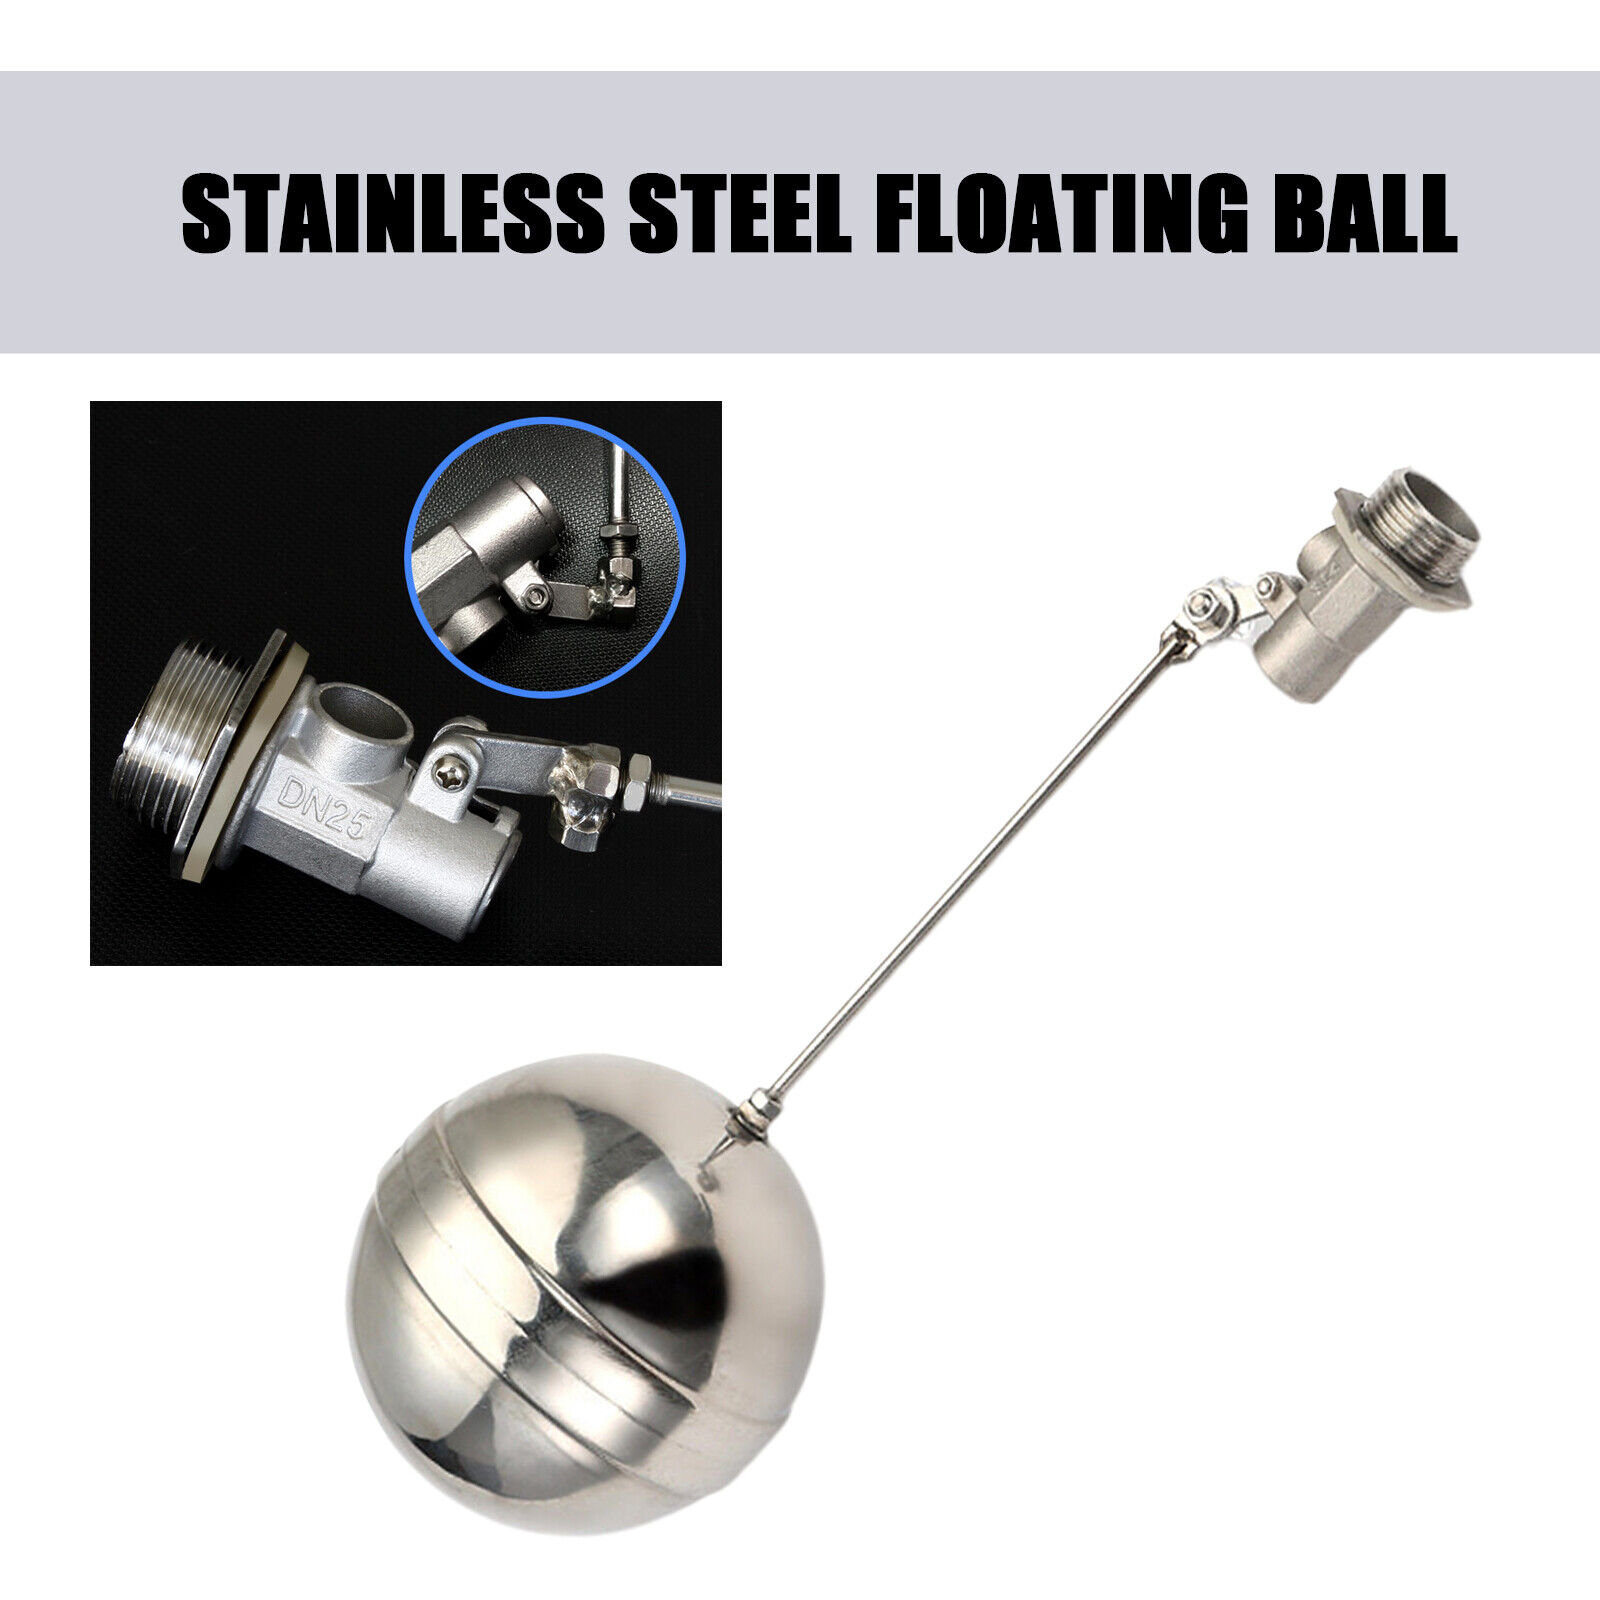 Stainless Steel Floating Ball DN15 1/2